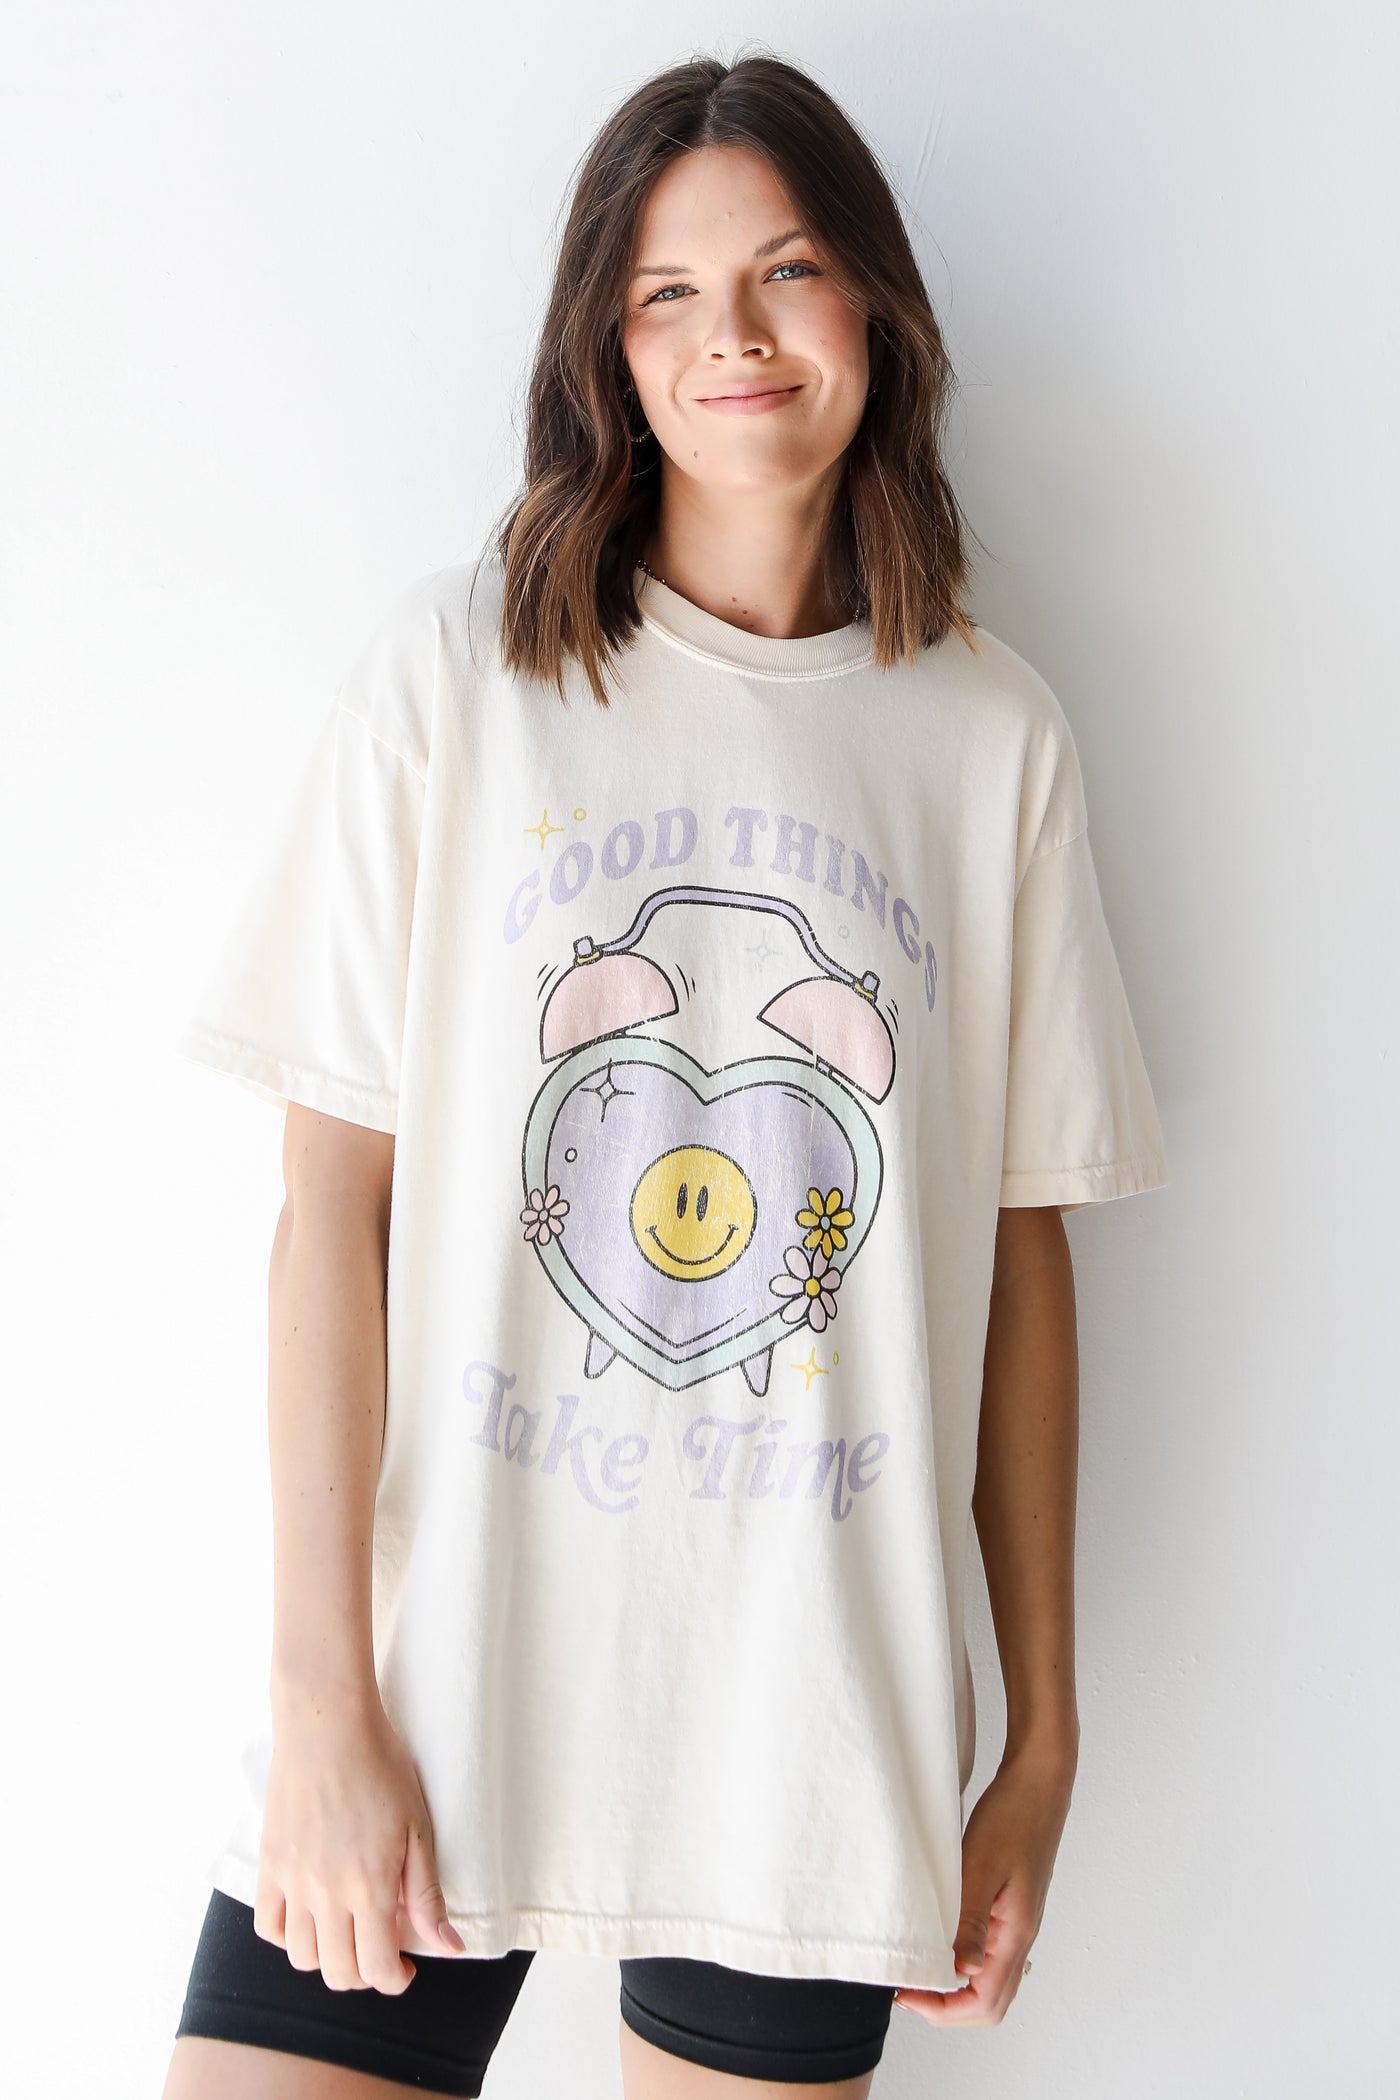 Good Things Take Time Graphic Tee front view